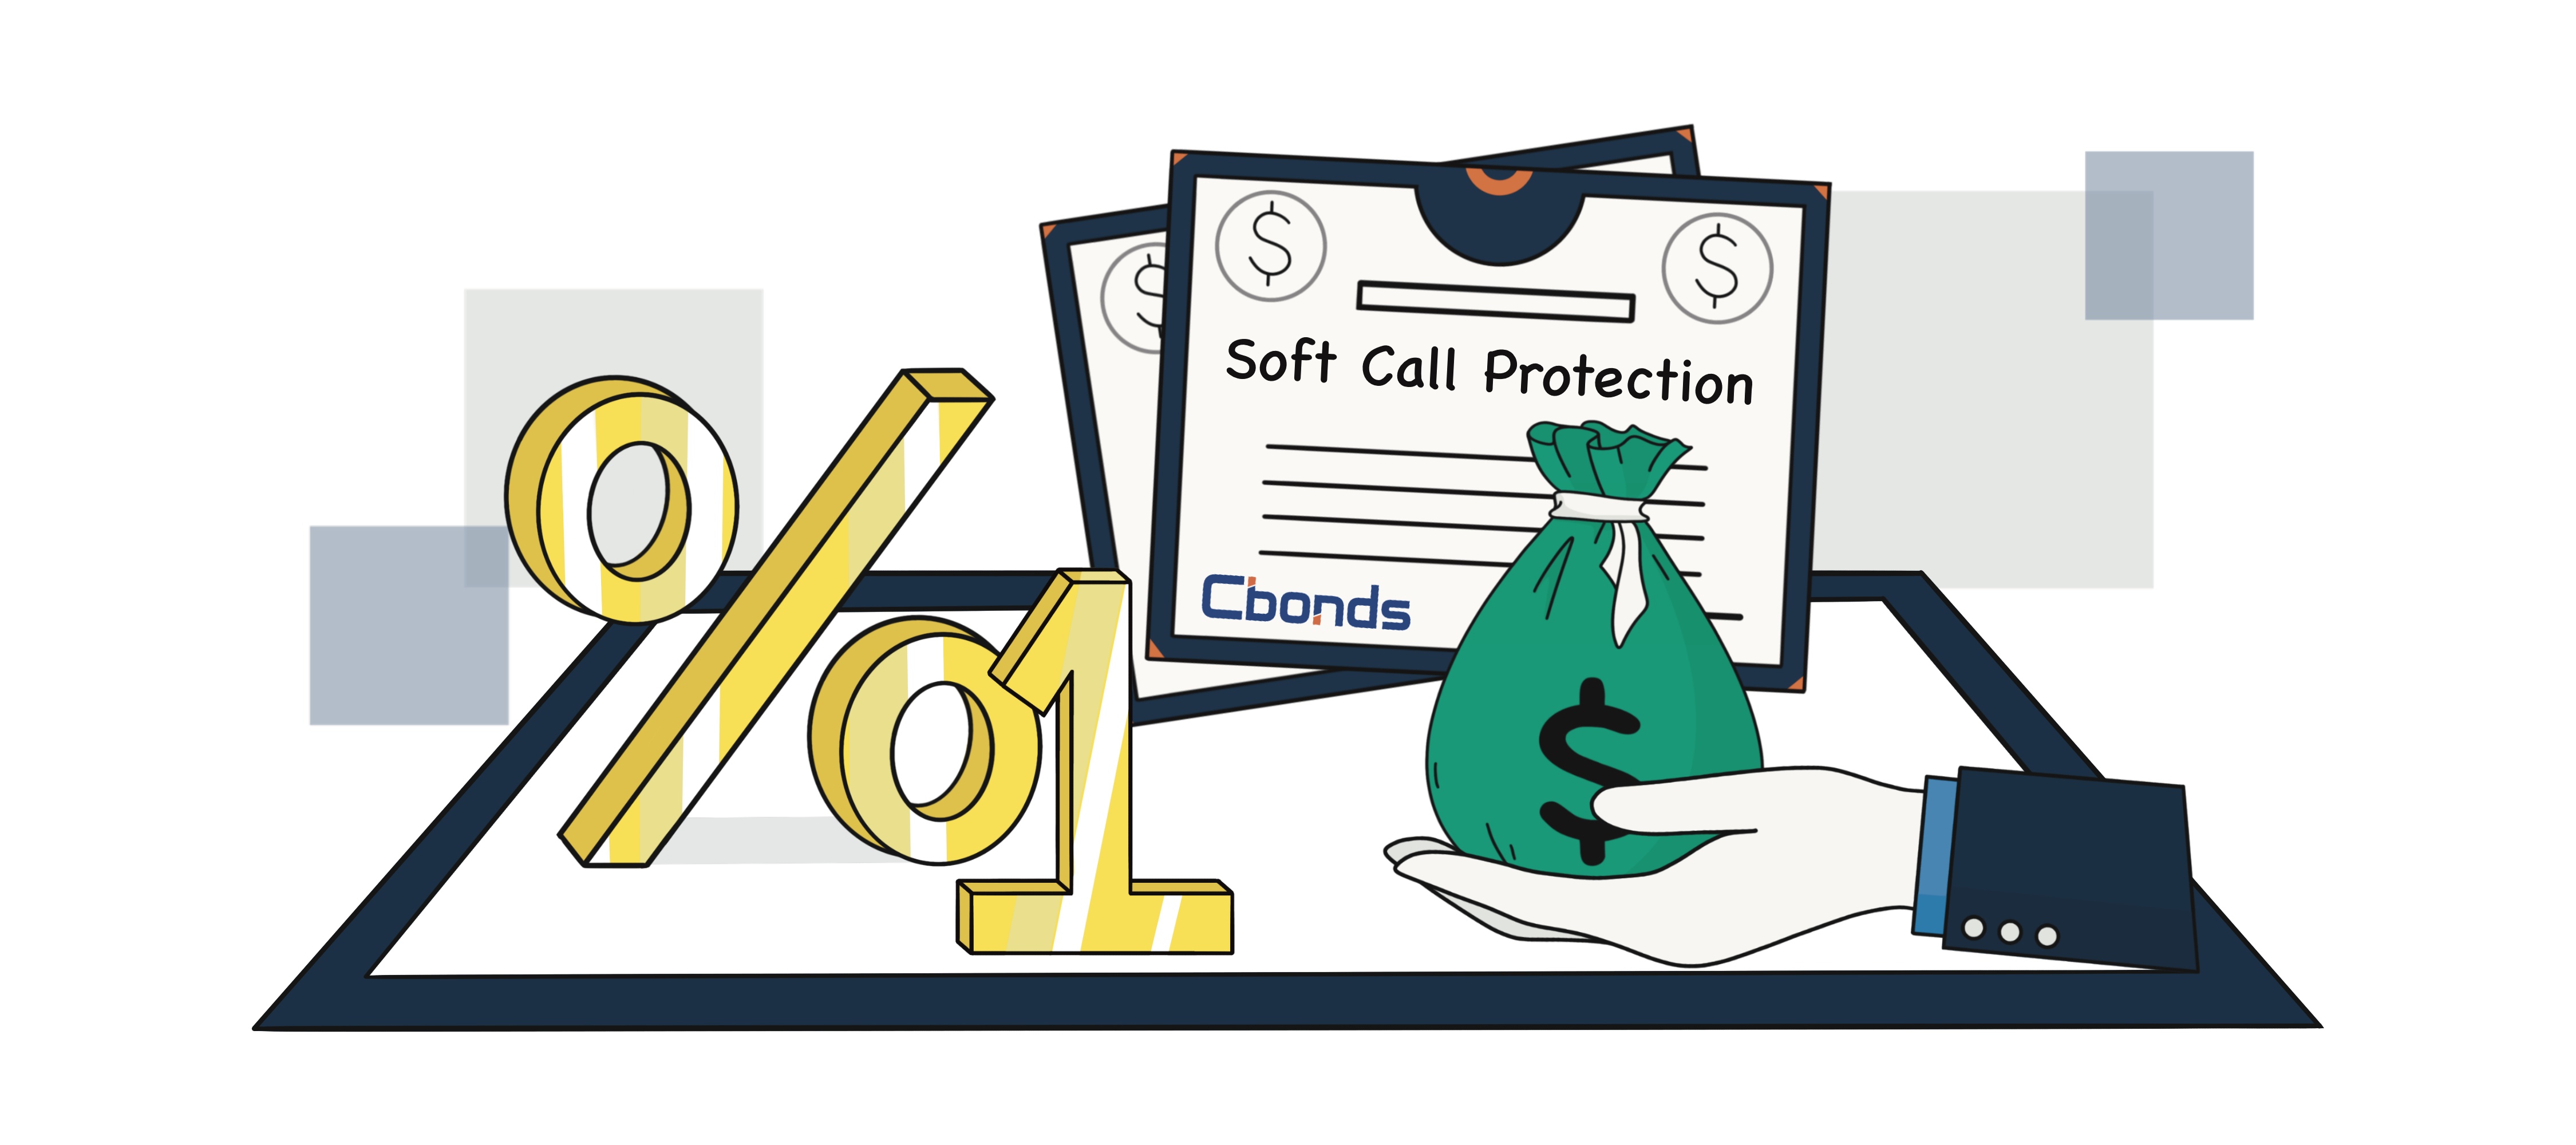 Soft Call Protection